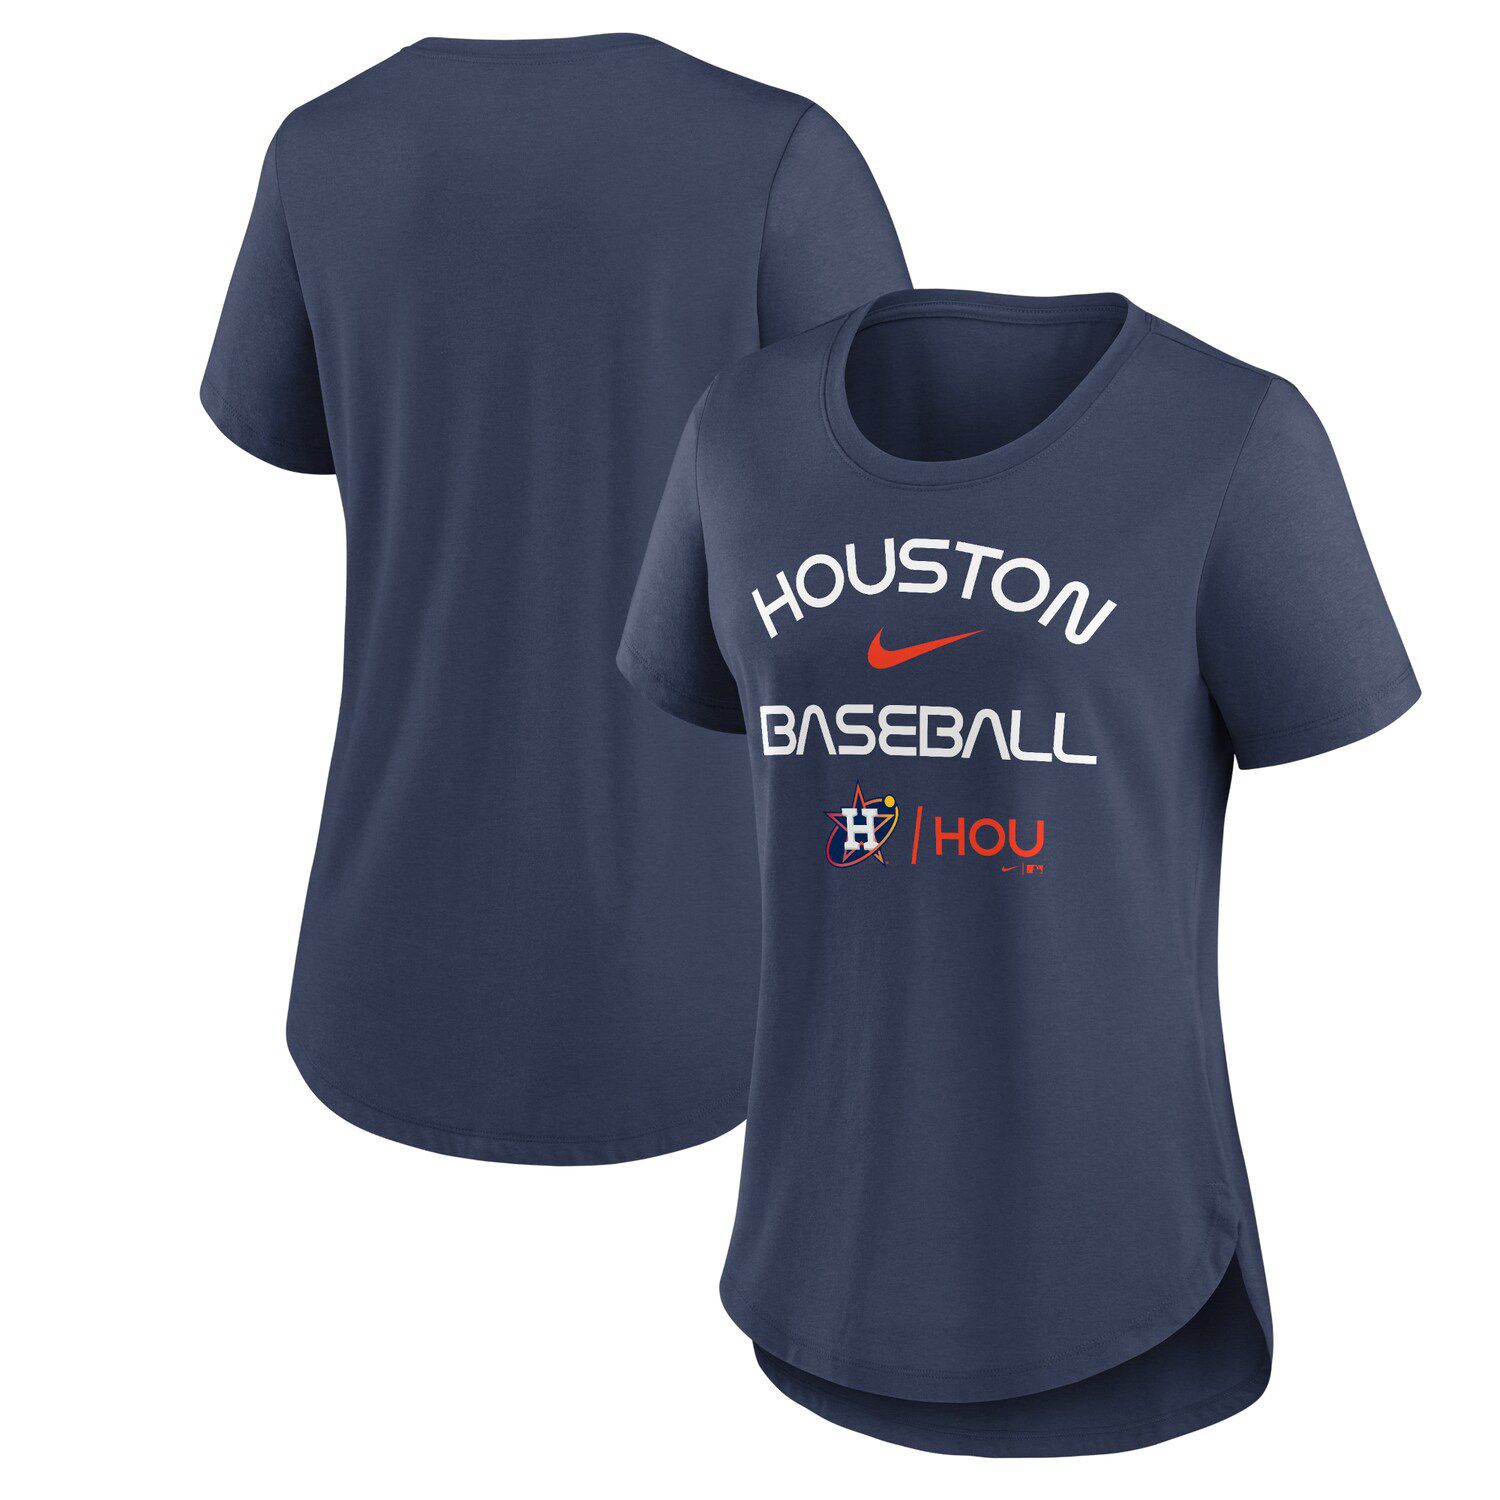 Nike Men's Houston Astros Authentic Collection Early Work Performance T-Shirt - Navy - S Each